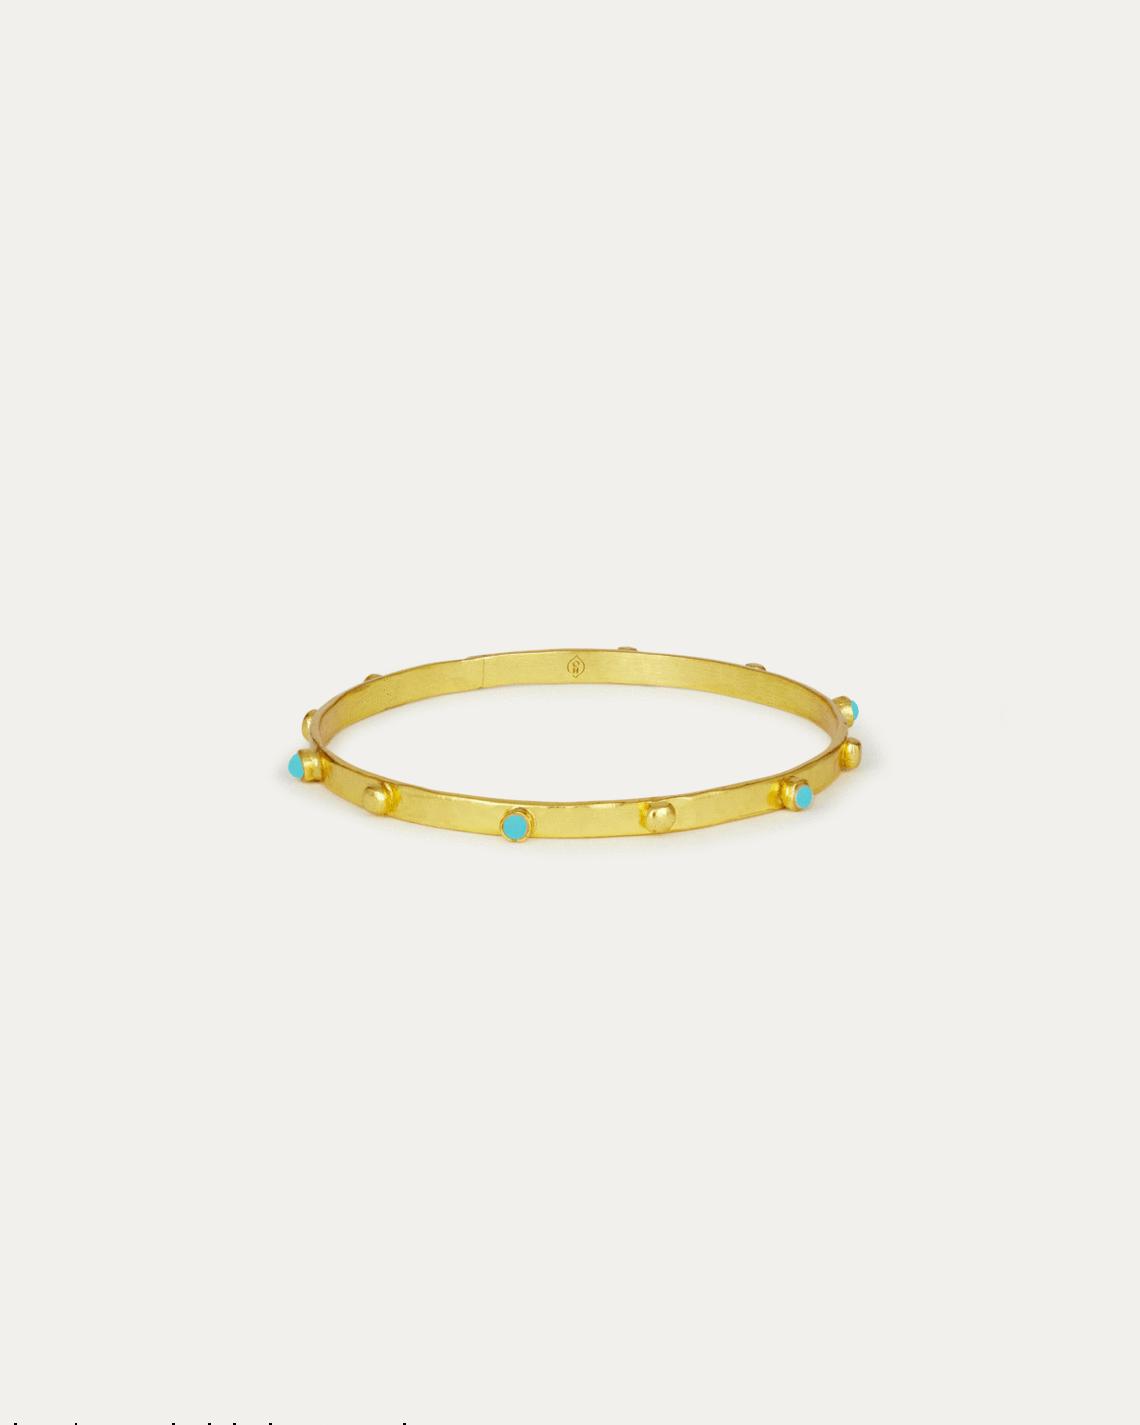 Ottoman Hands Tanrica Gold Bangle with Turquoise Beads